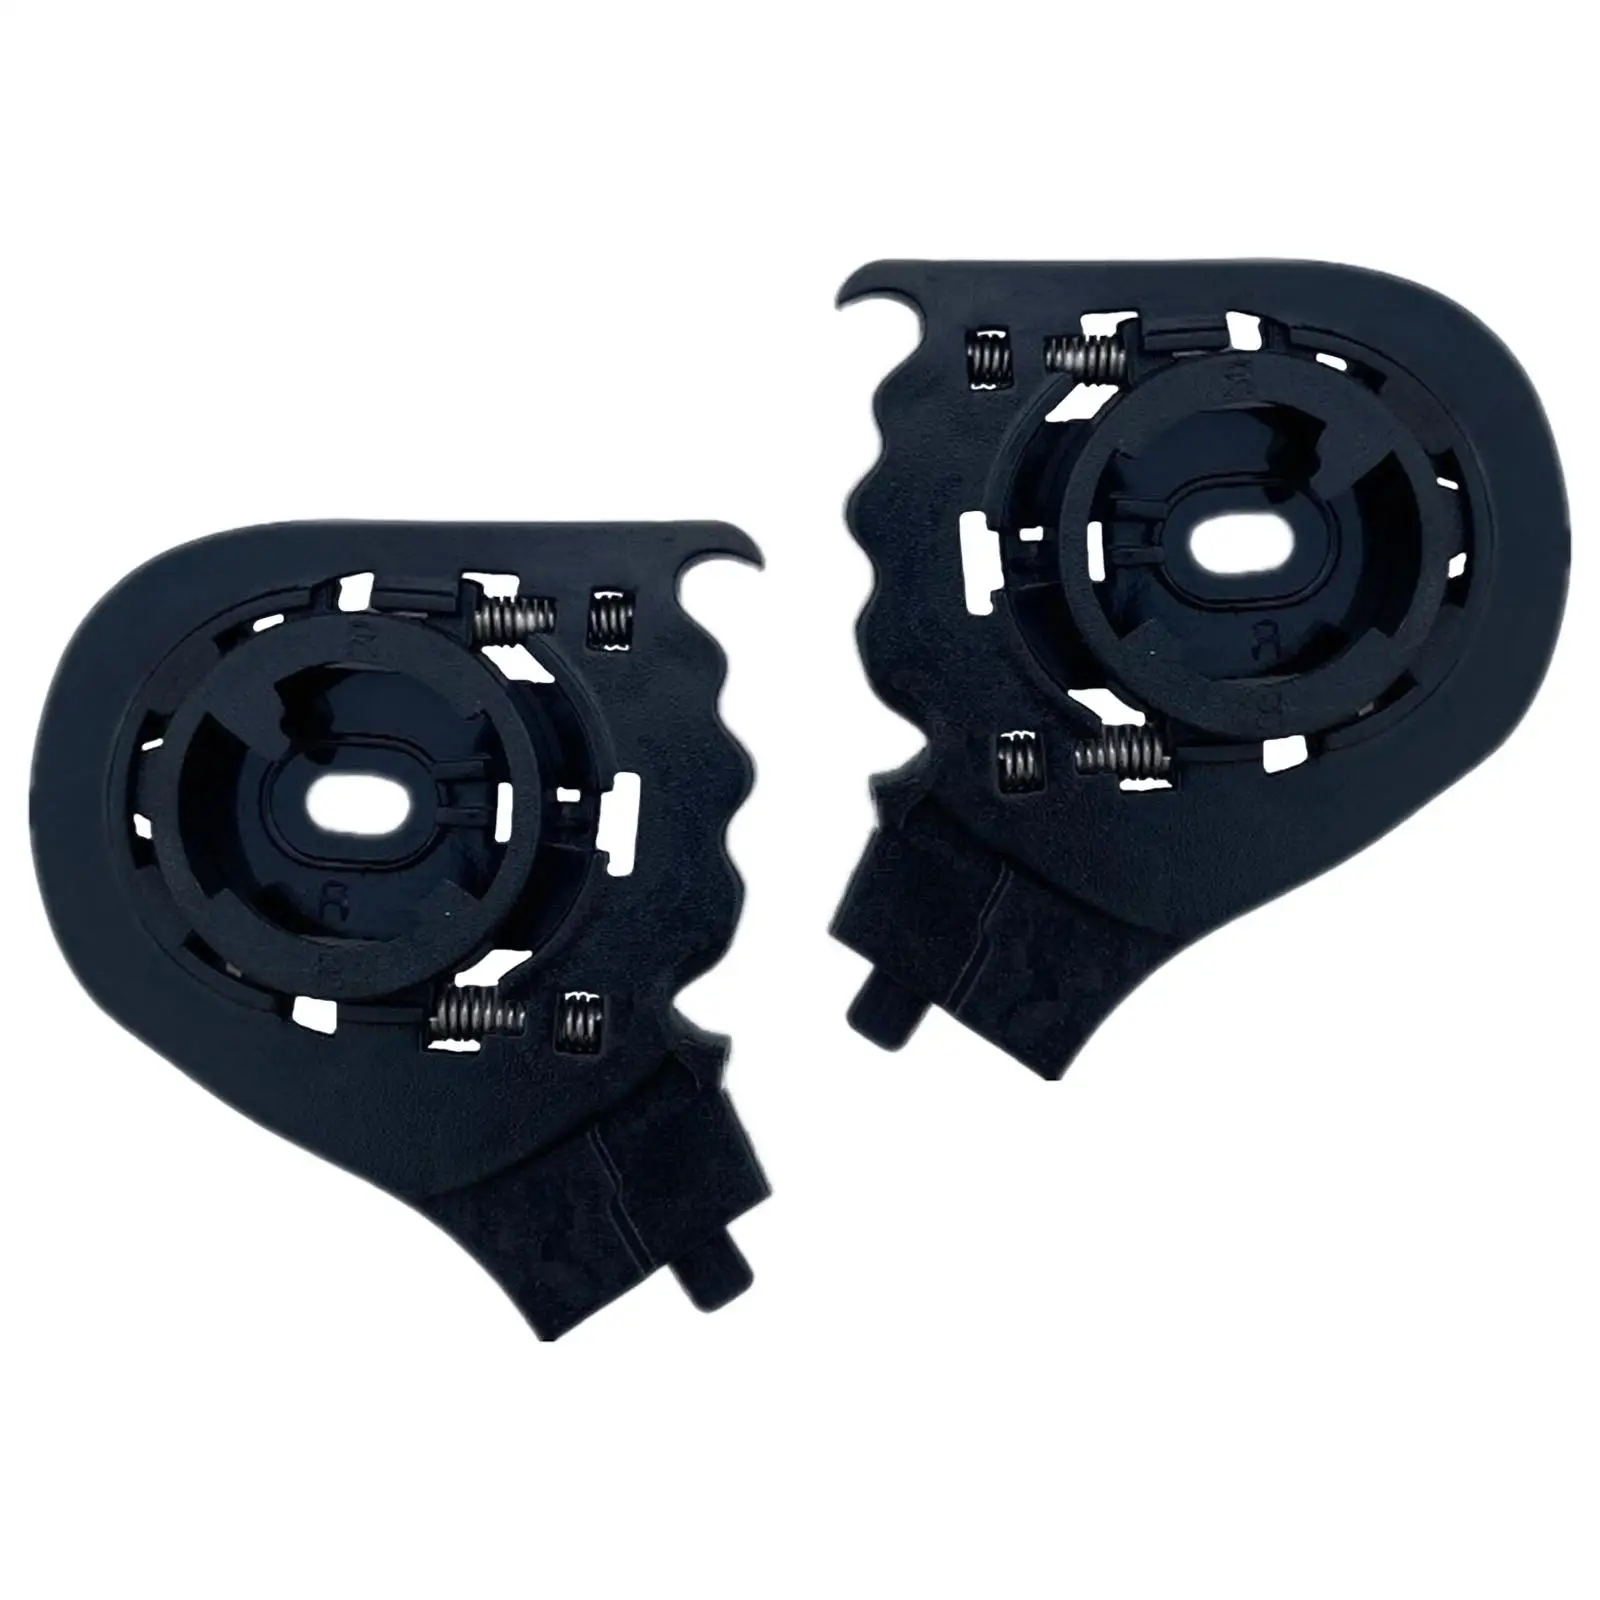 2x Motorcycle, Replacement Side Plate Helmets for of569